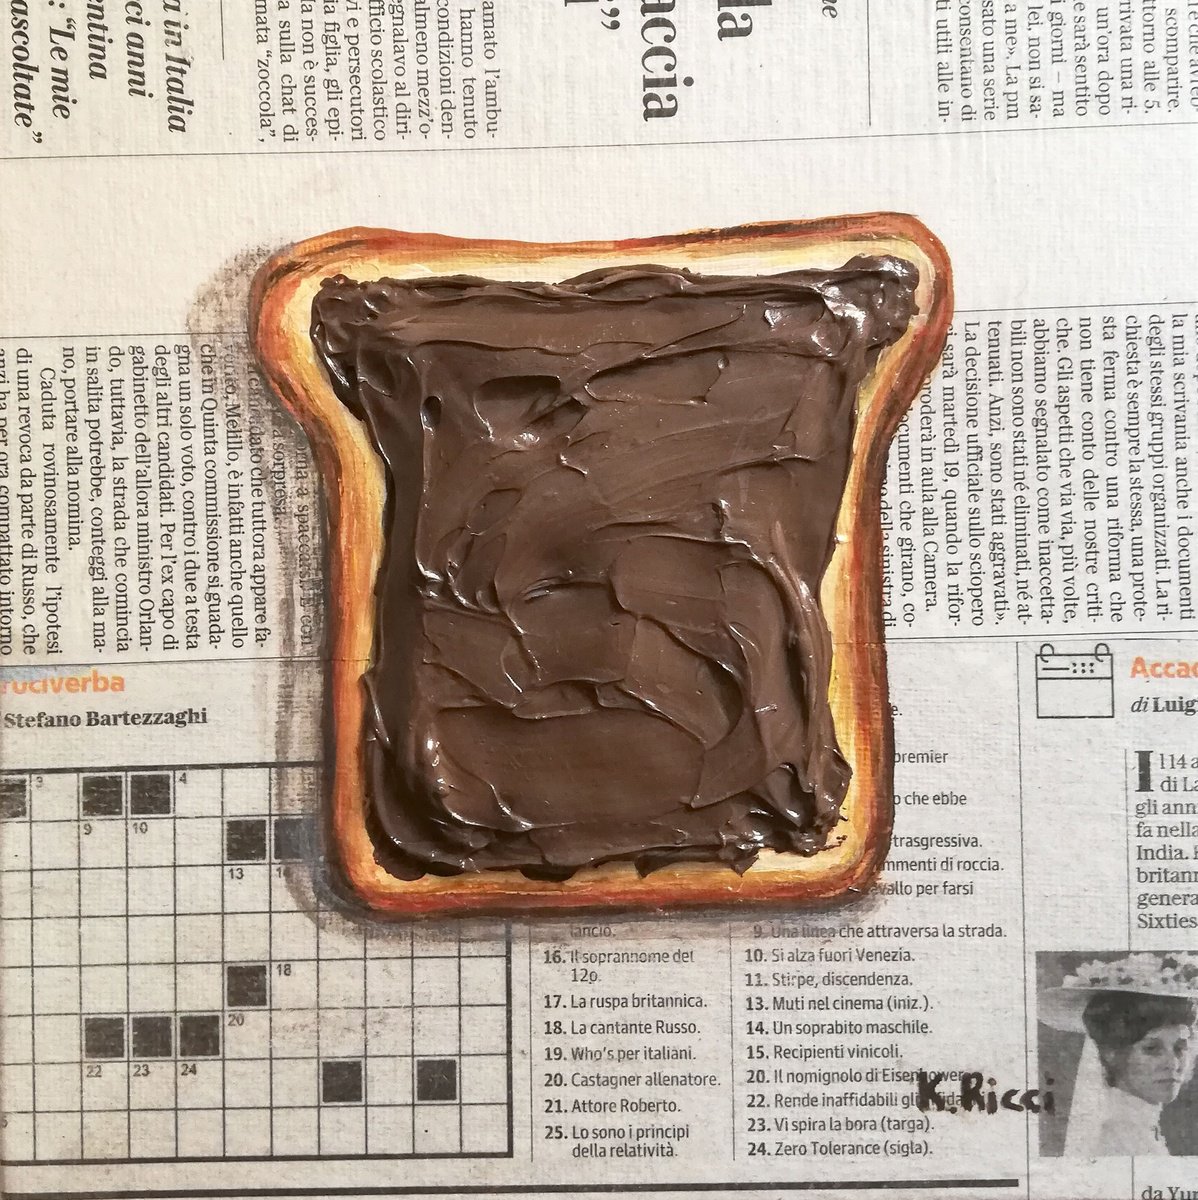 Toast with Nutella Original Acrylic on Canvas Board Painting 8 by 8 inches (20x20 cm) by Katia Ricci